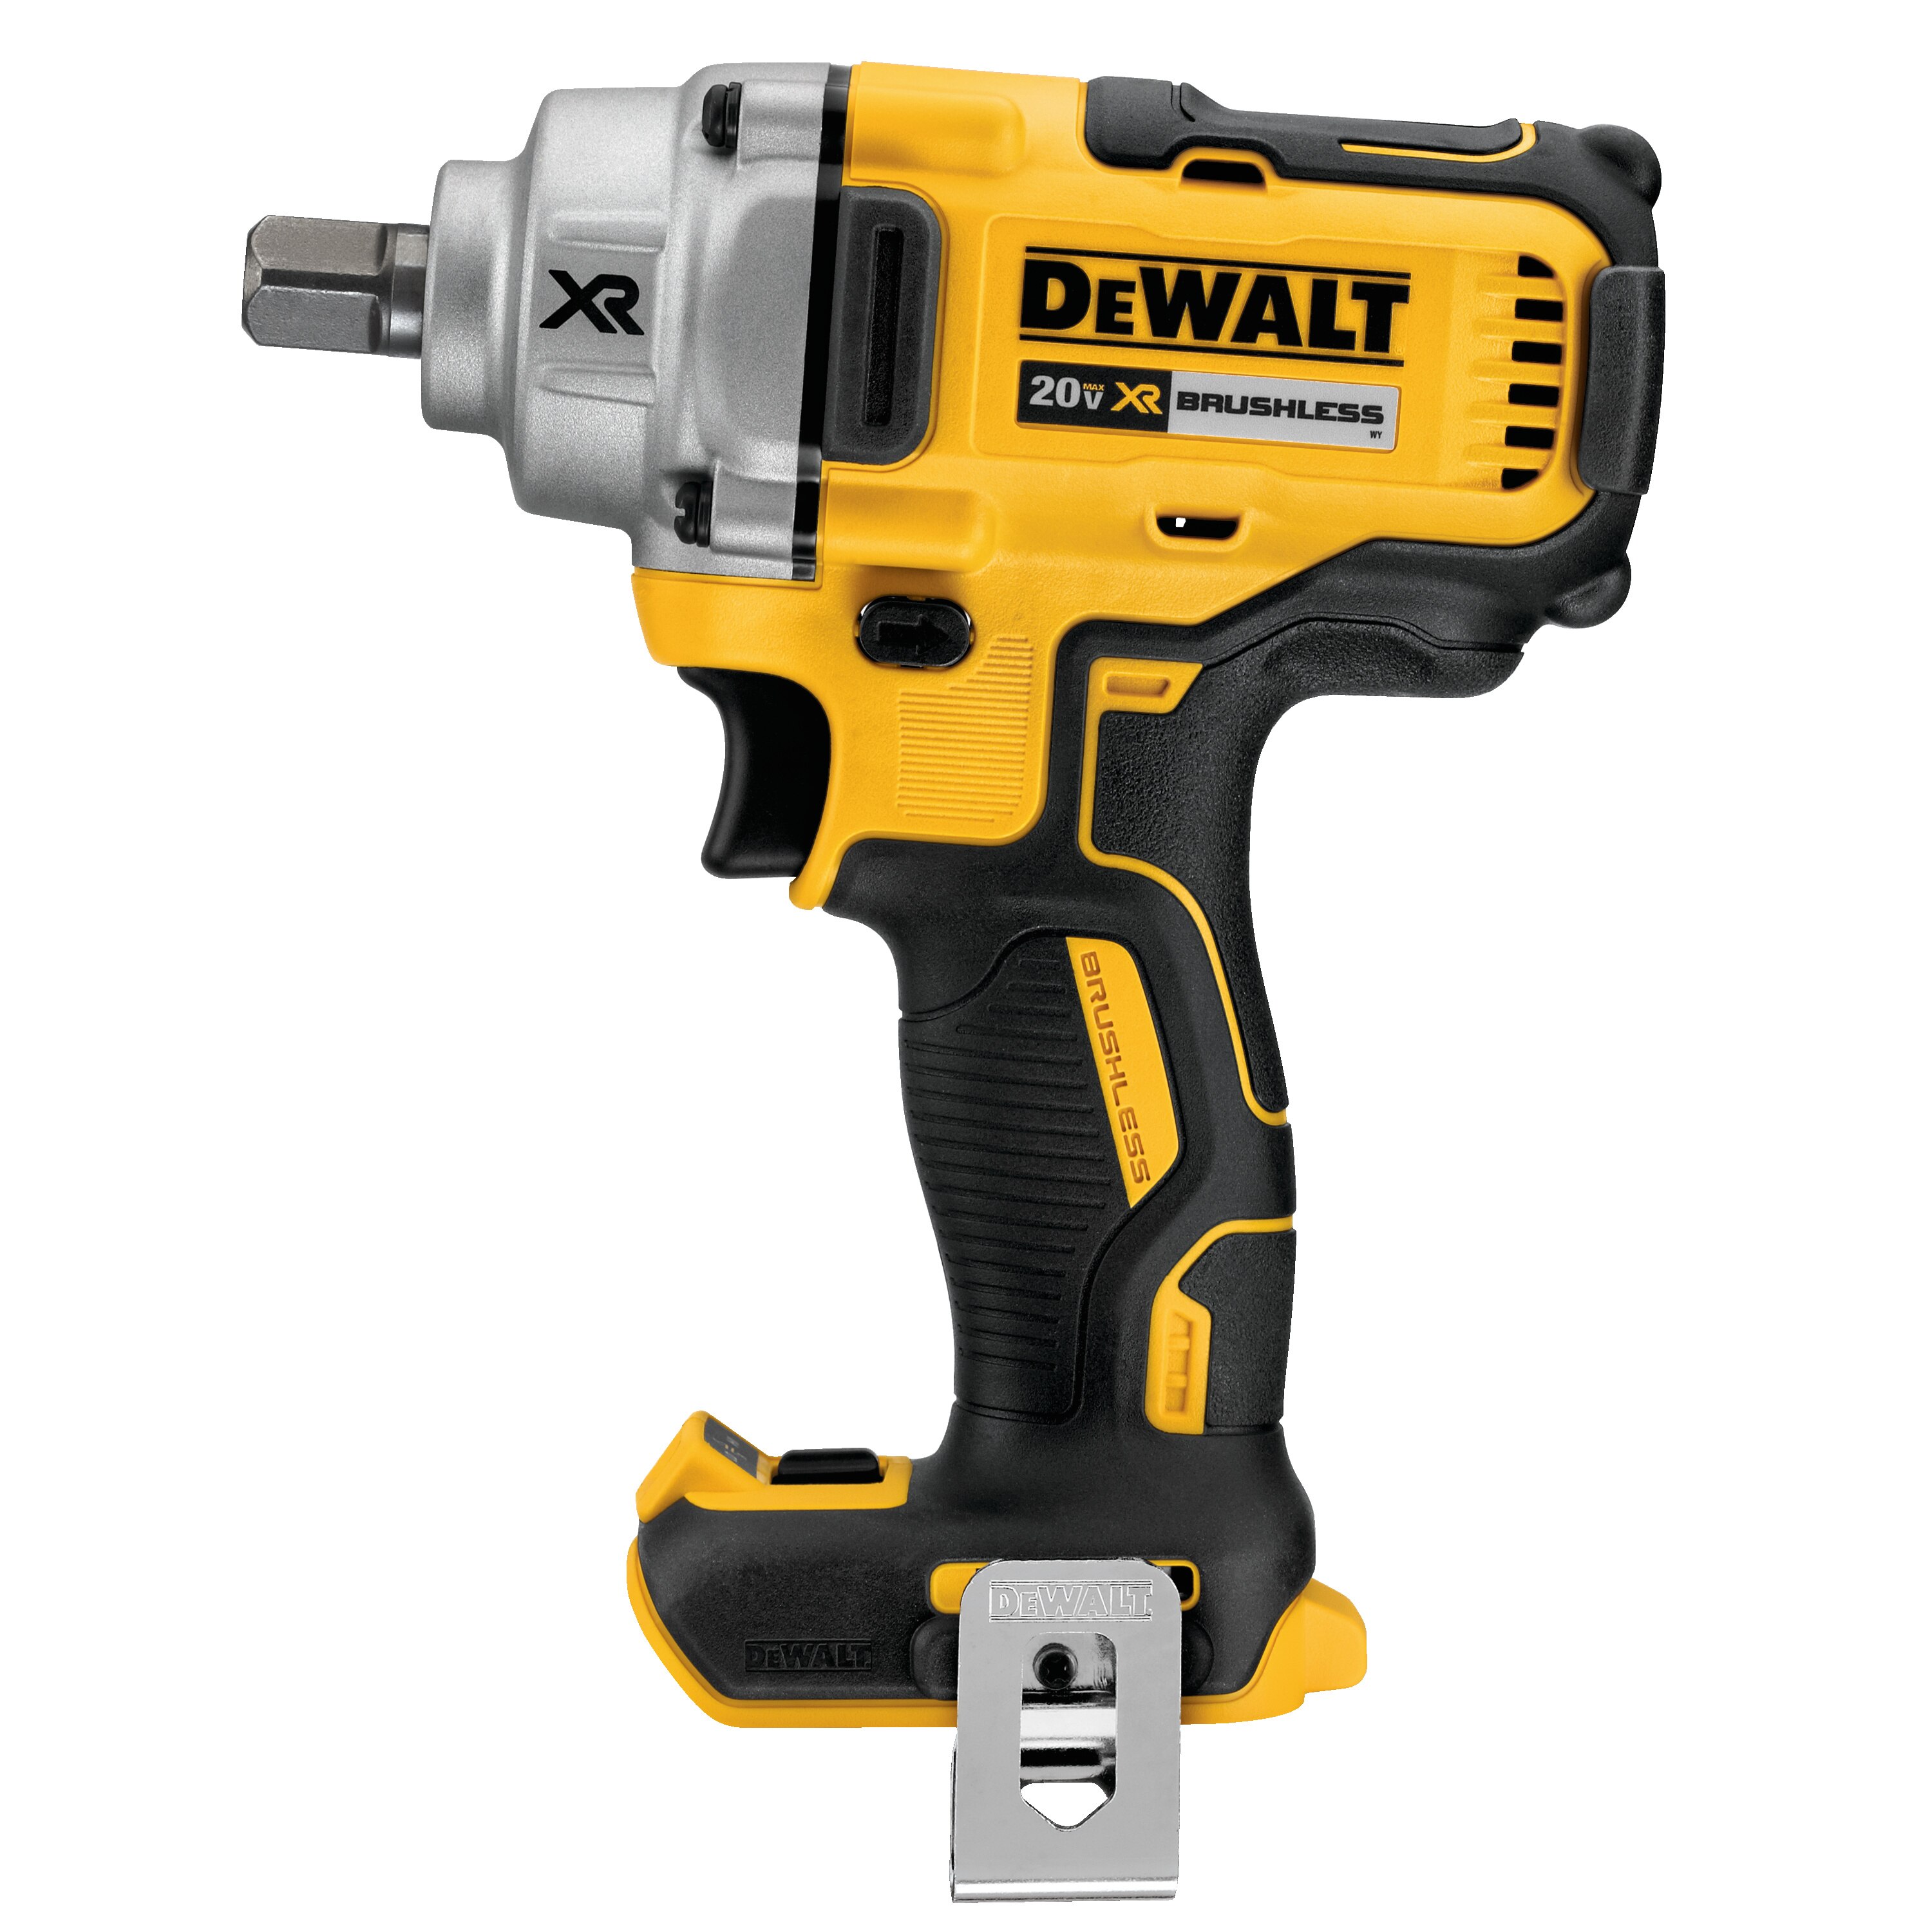 DeWALT 20V MAX XR 1/2 Inch Cordless Impact Wrench with Detent Pin Anvil (Tool Only) from Columbia Safety